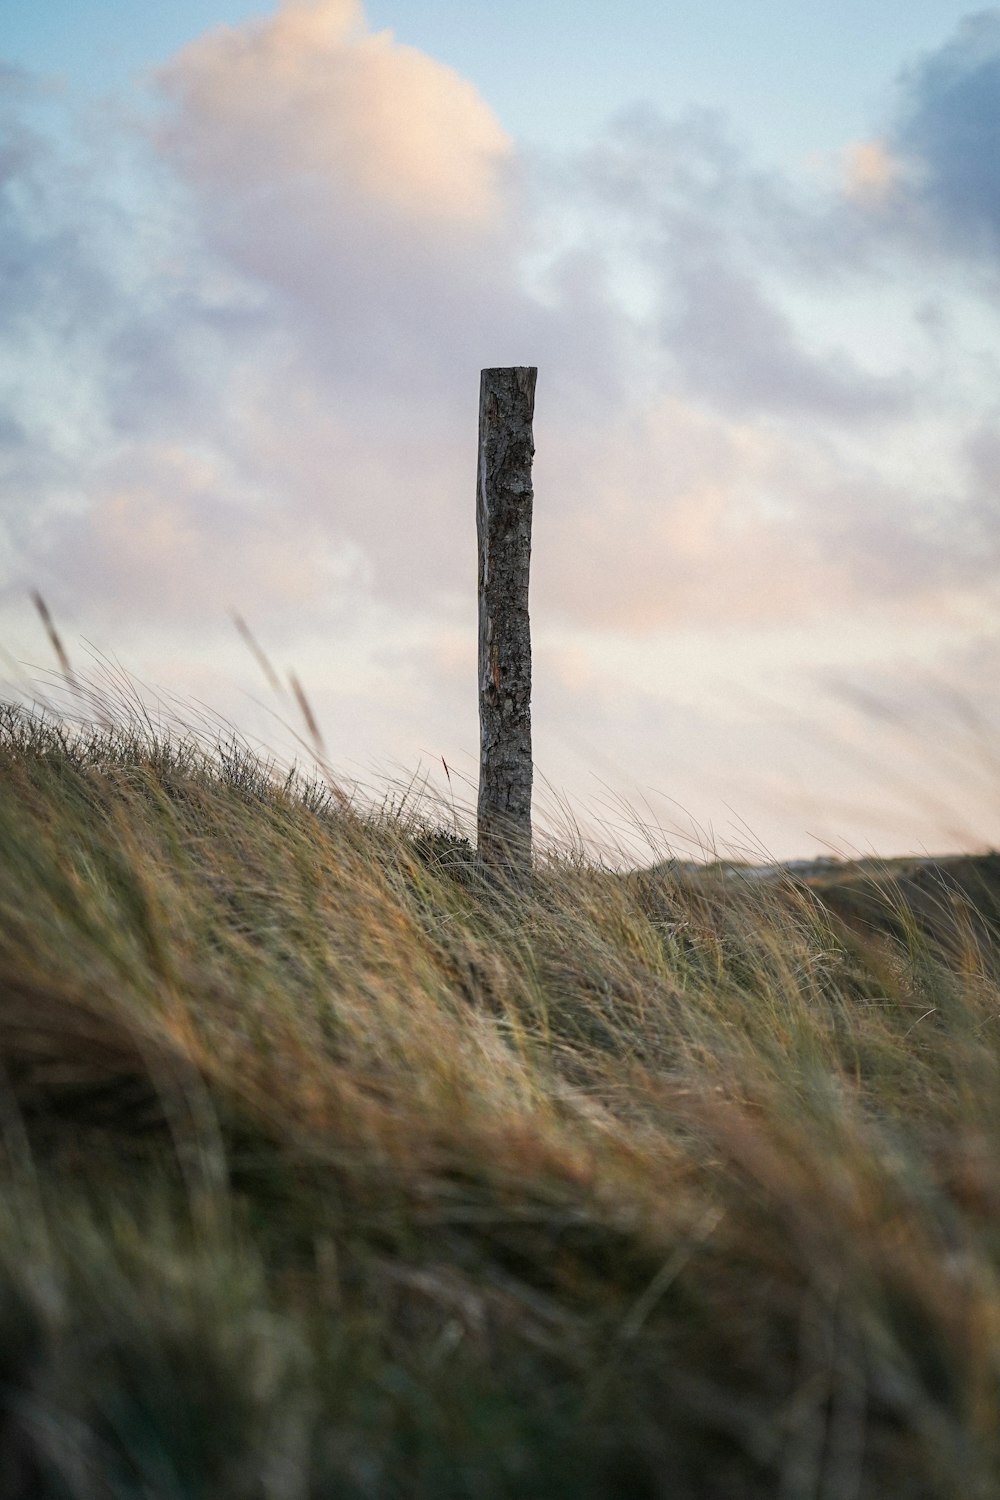 brown wooden post on green grass field under white clouds during daytime